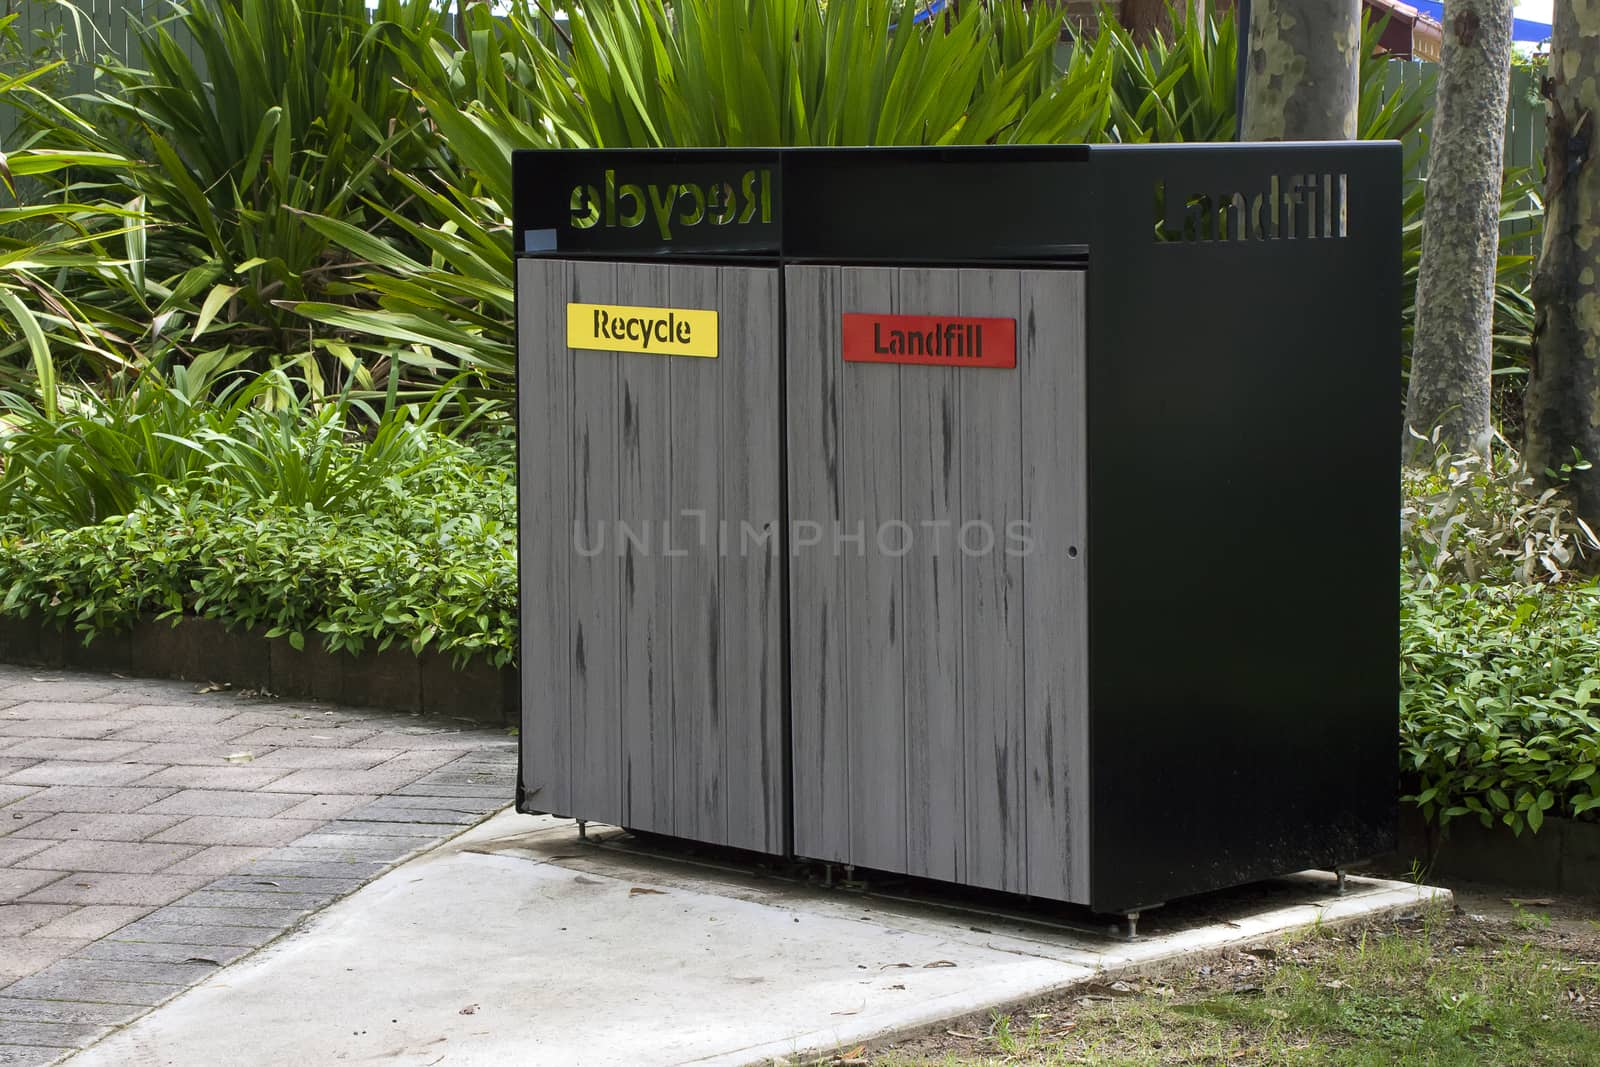 Public recycling and landfill waste bin enclosure by definitearts